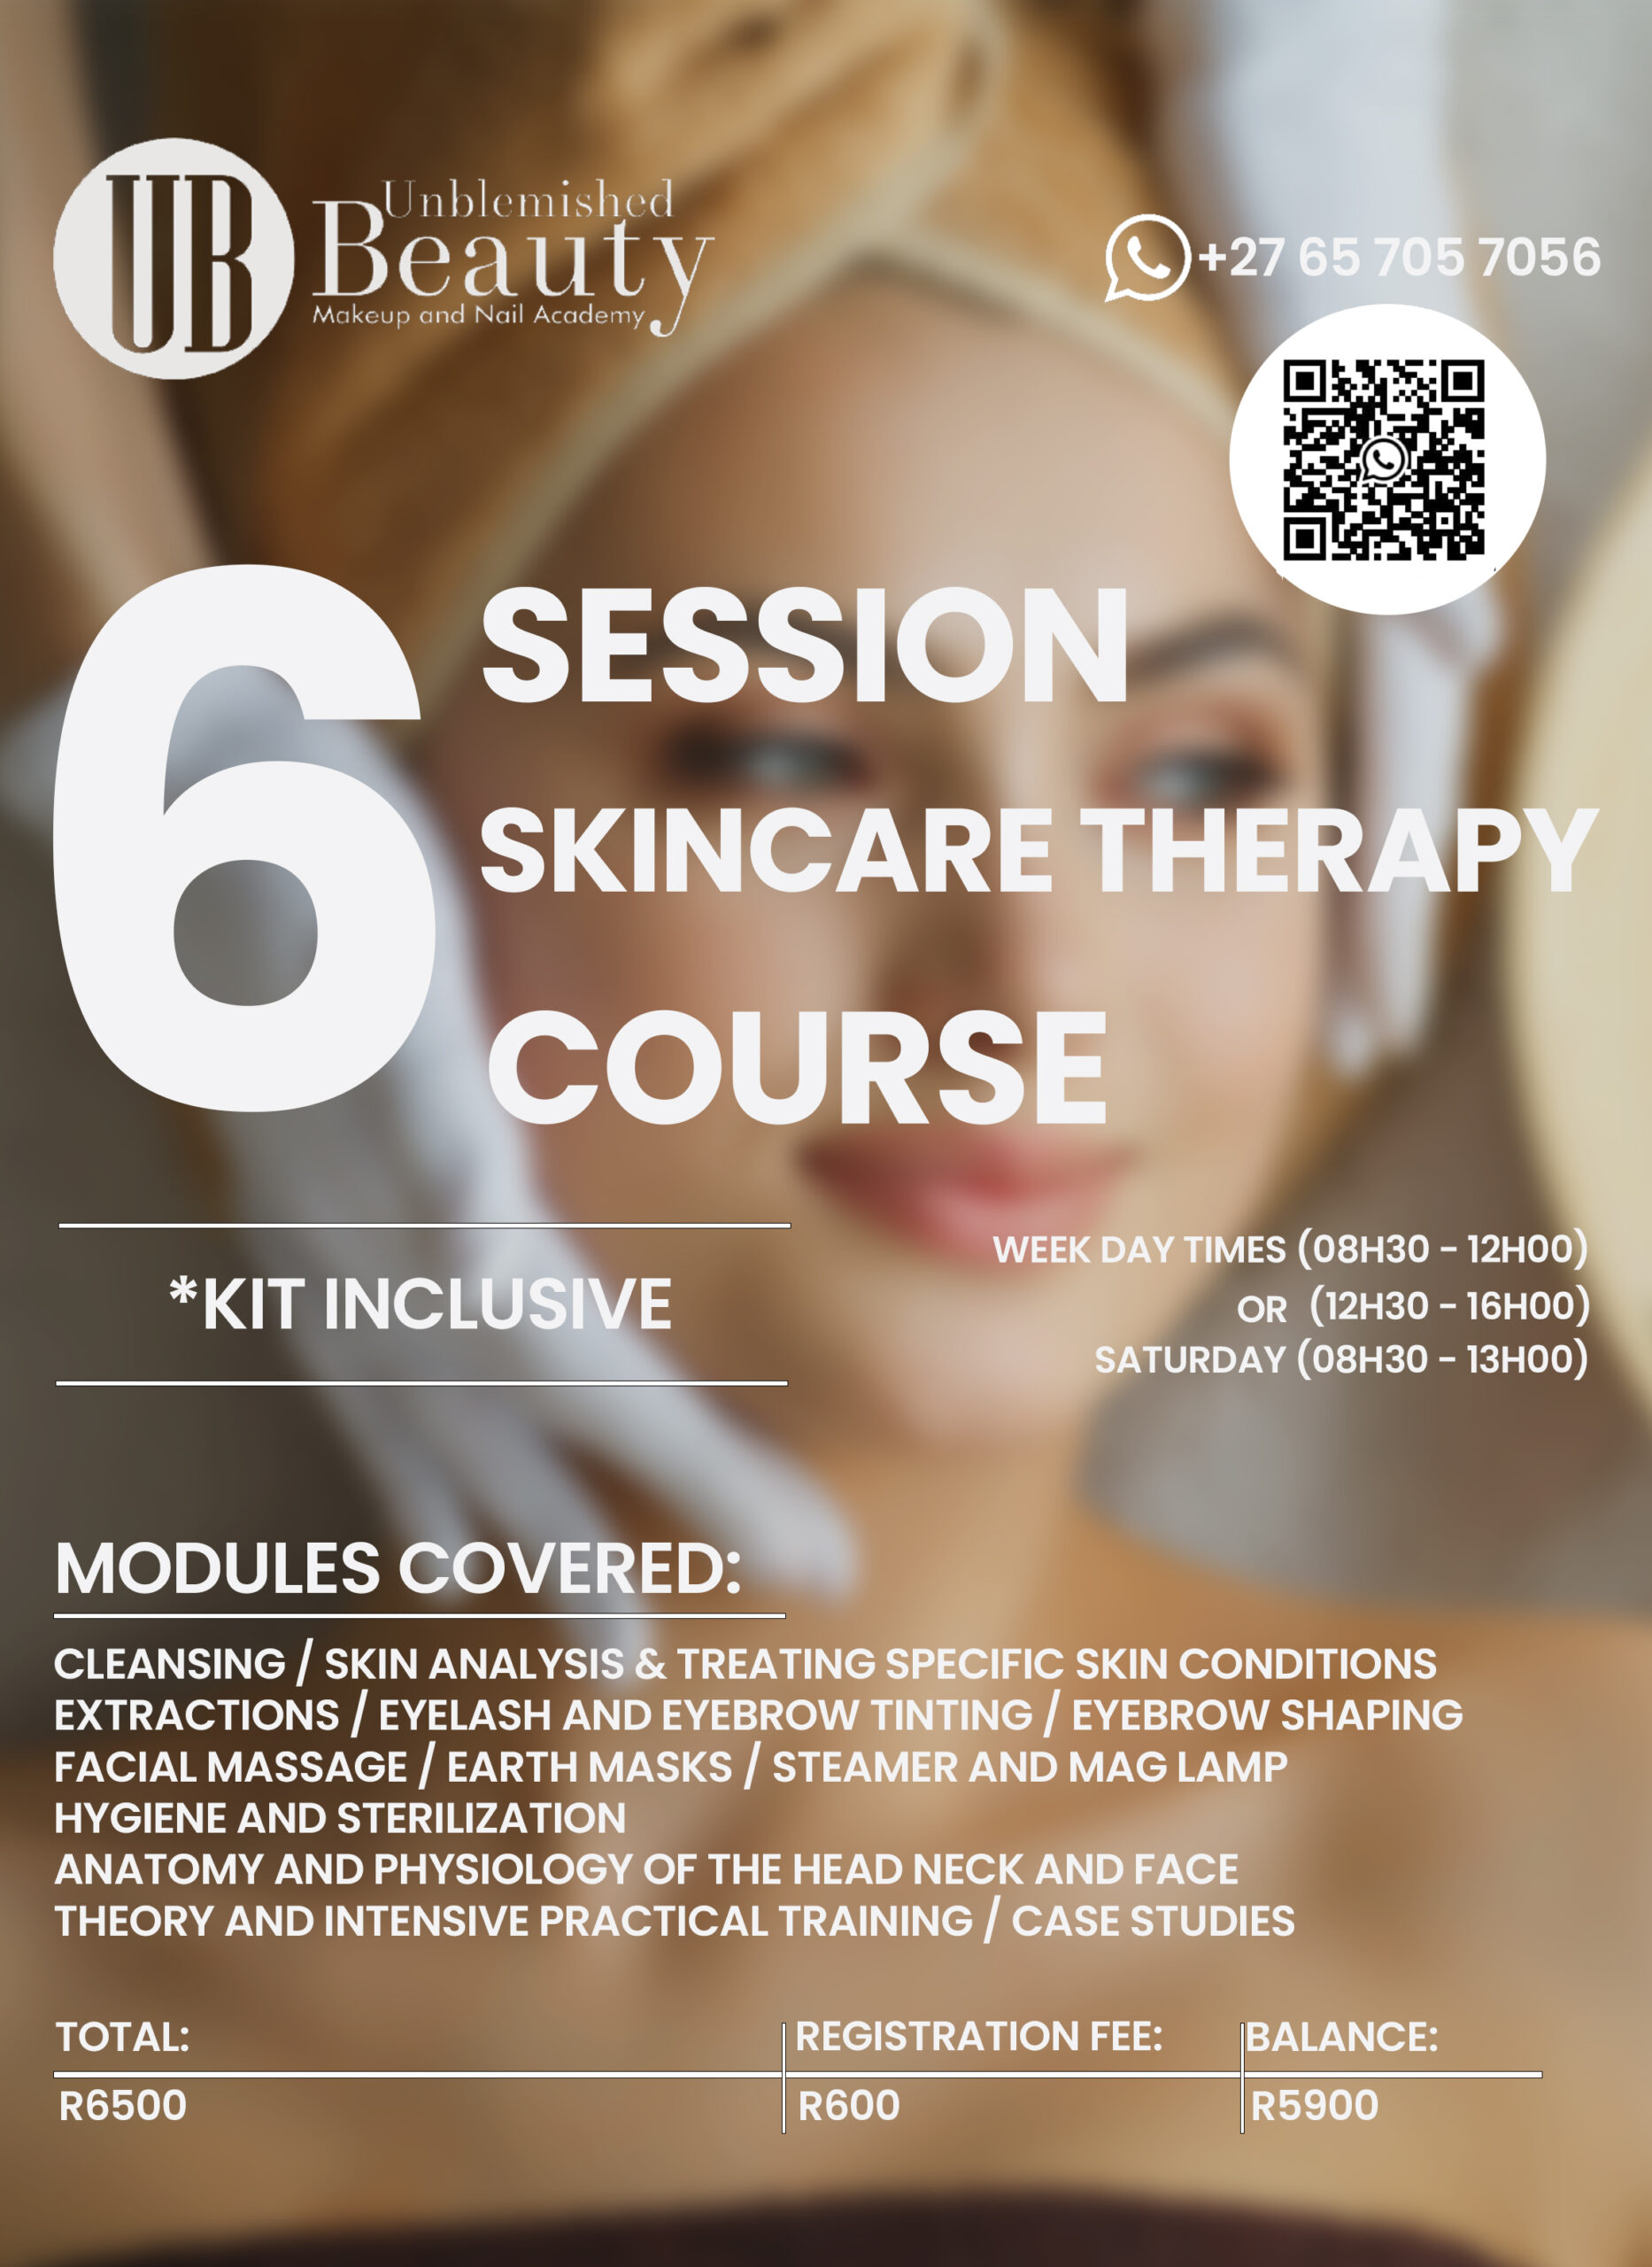 Unblemished Beauty Course Posters- Skincare Therapy 2